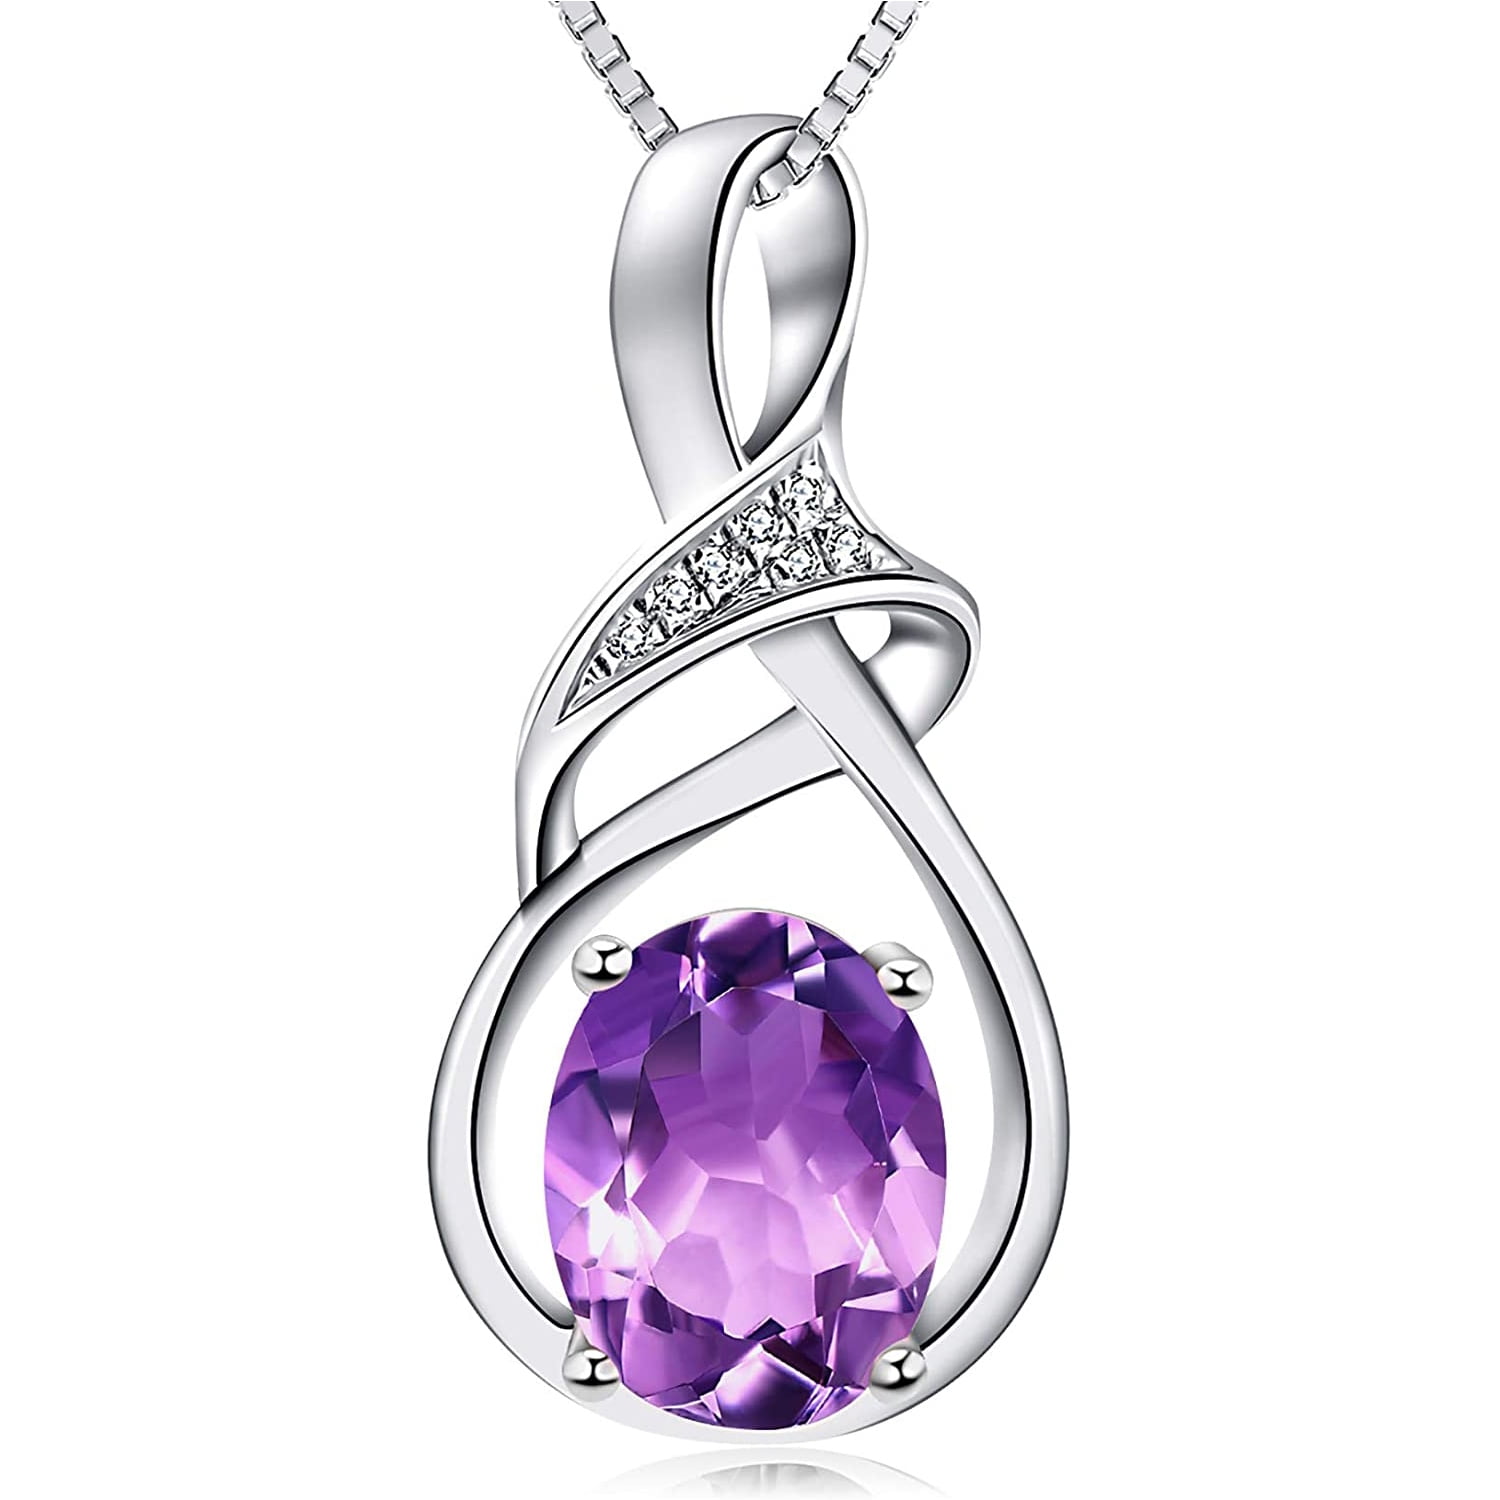 2023 New Amethyst Jewelry Gifts for Women Necklace Heart Pendant Necklaces  Pendants Teen Necklaces for Girls (F, One Size)